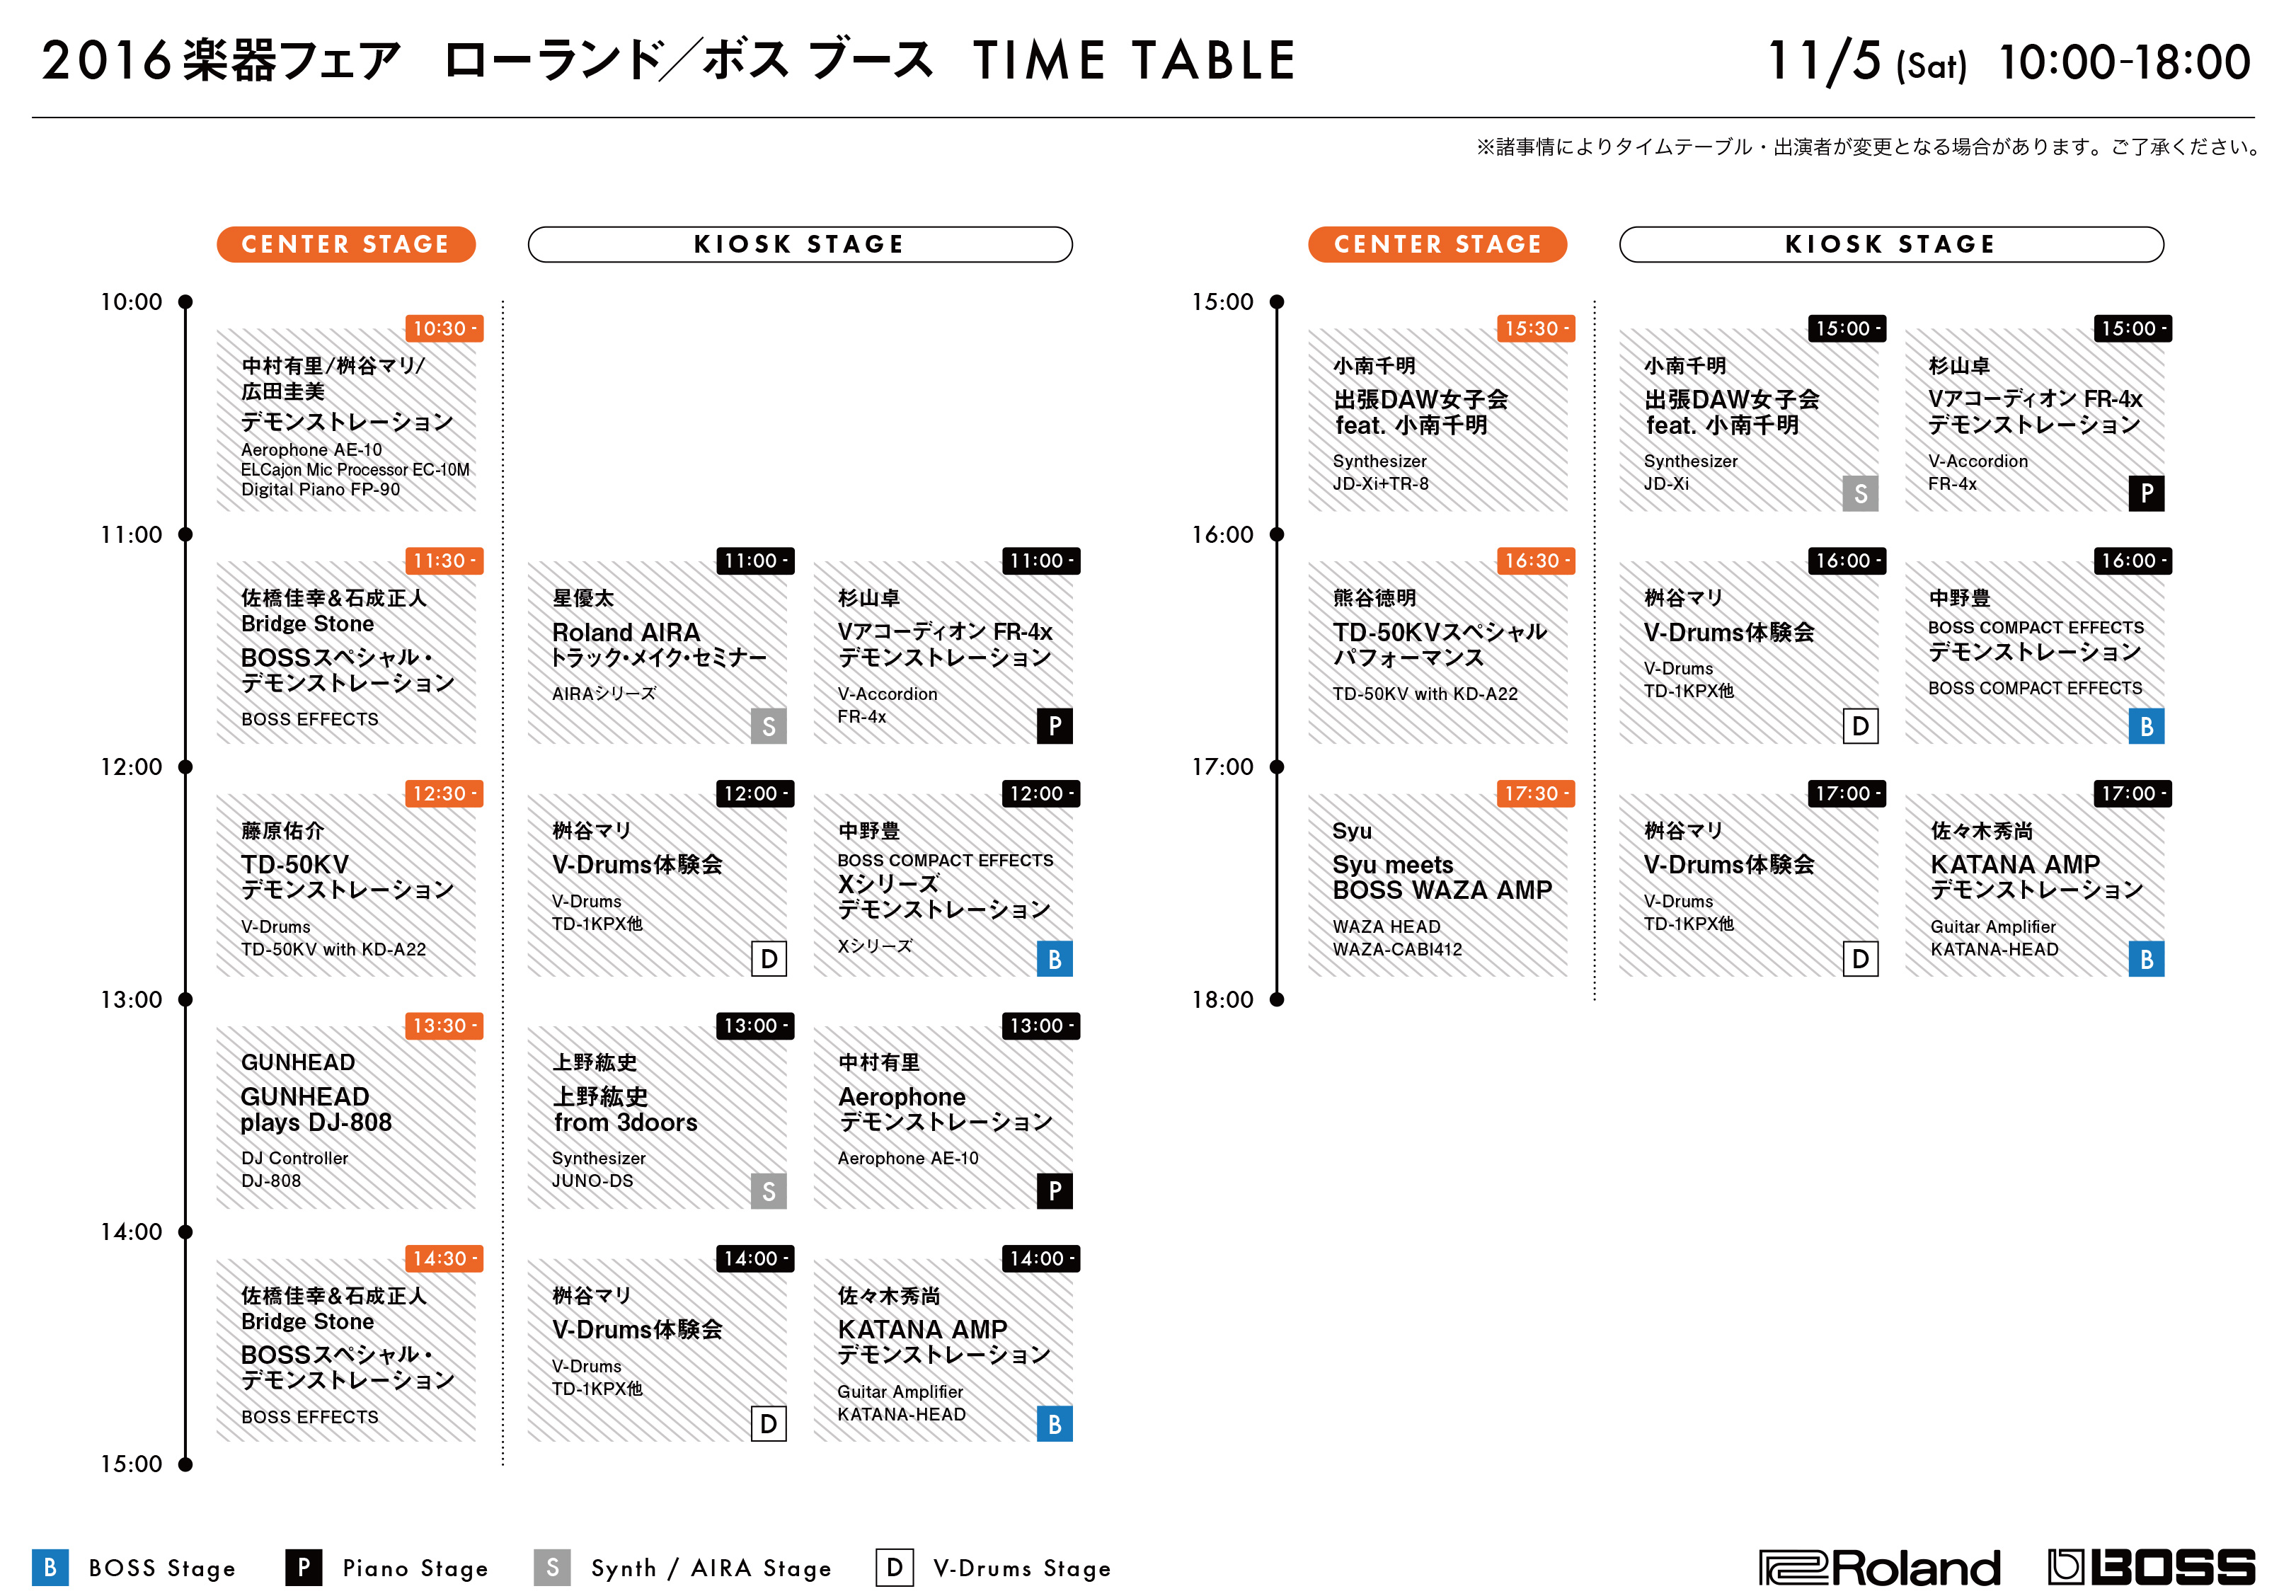 timetable_roland_boss_20161105